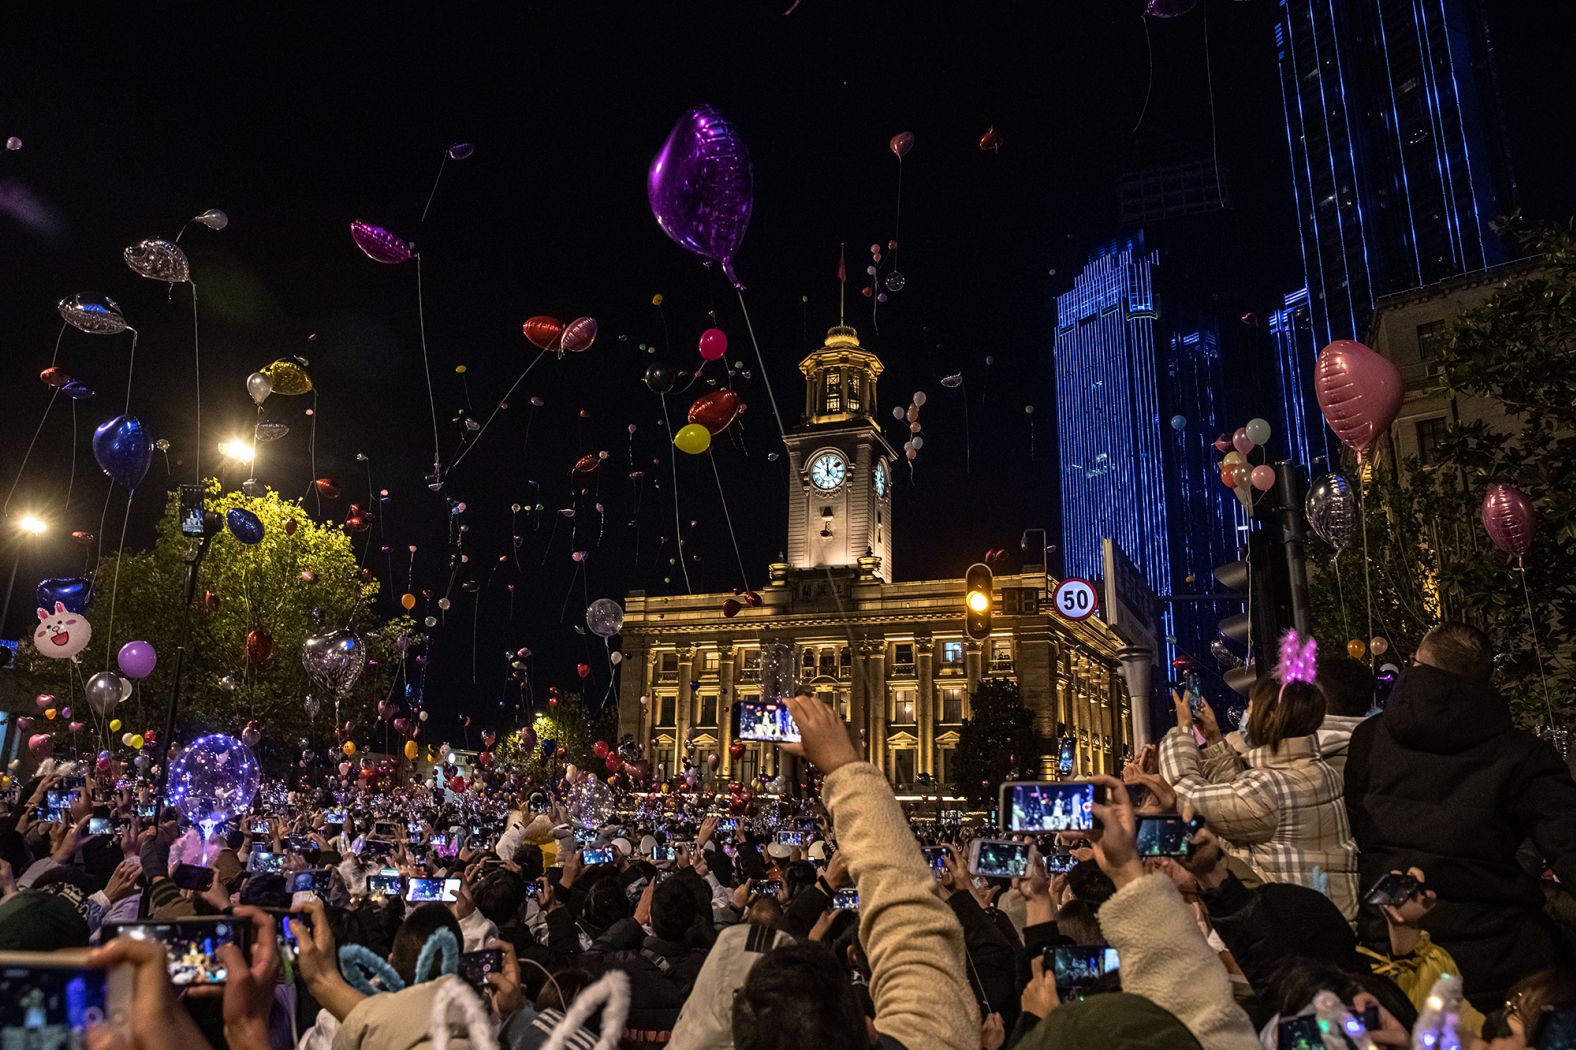 People celebrate the new year in Wuhan, China, which nearly a year ago became the epicenter of the coronavirus outbreak.